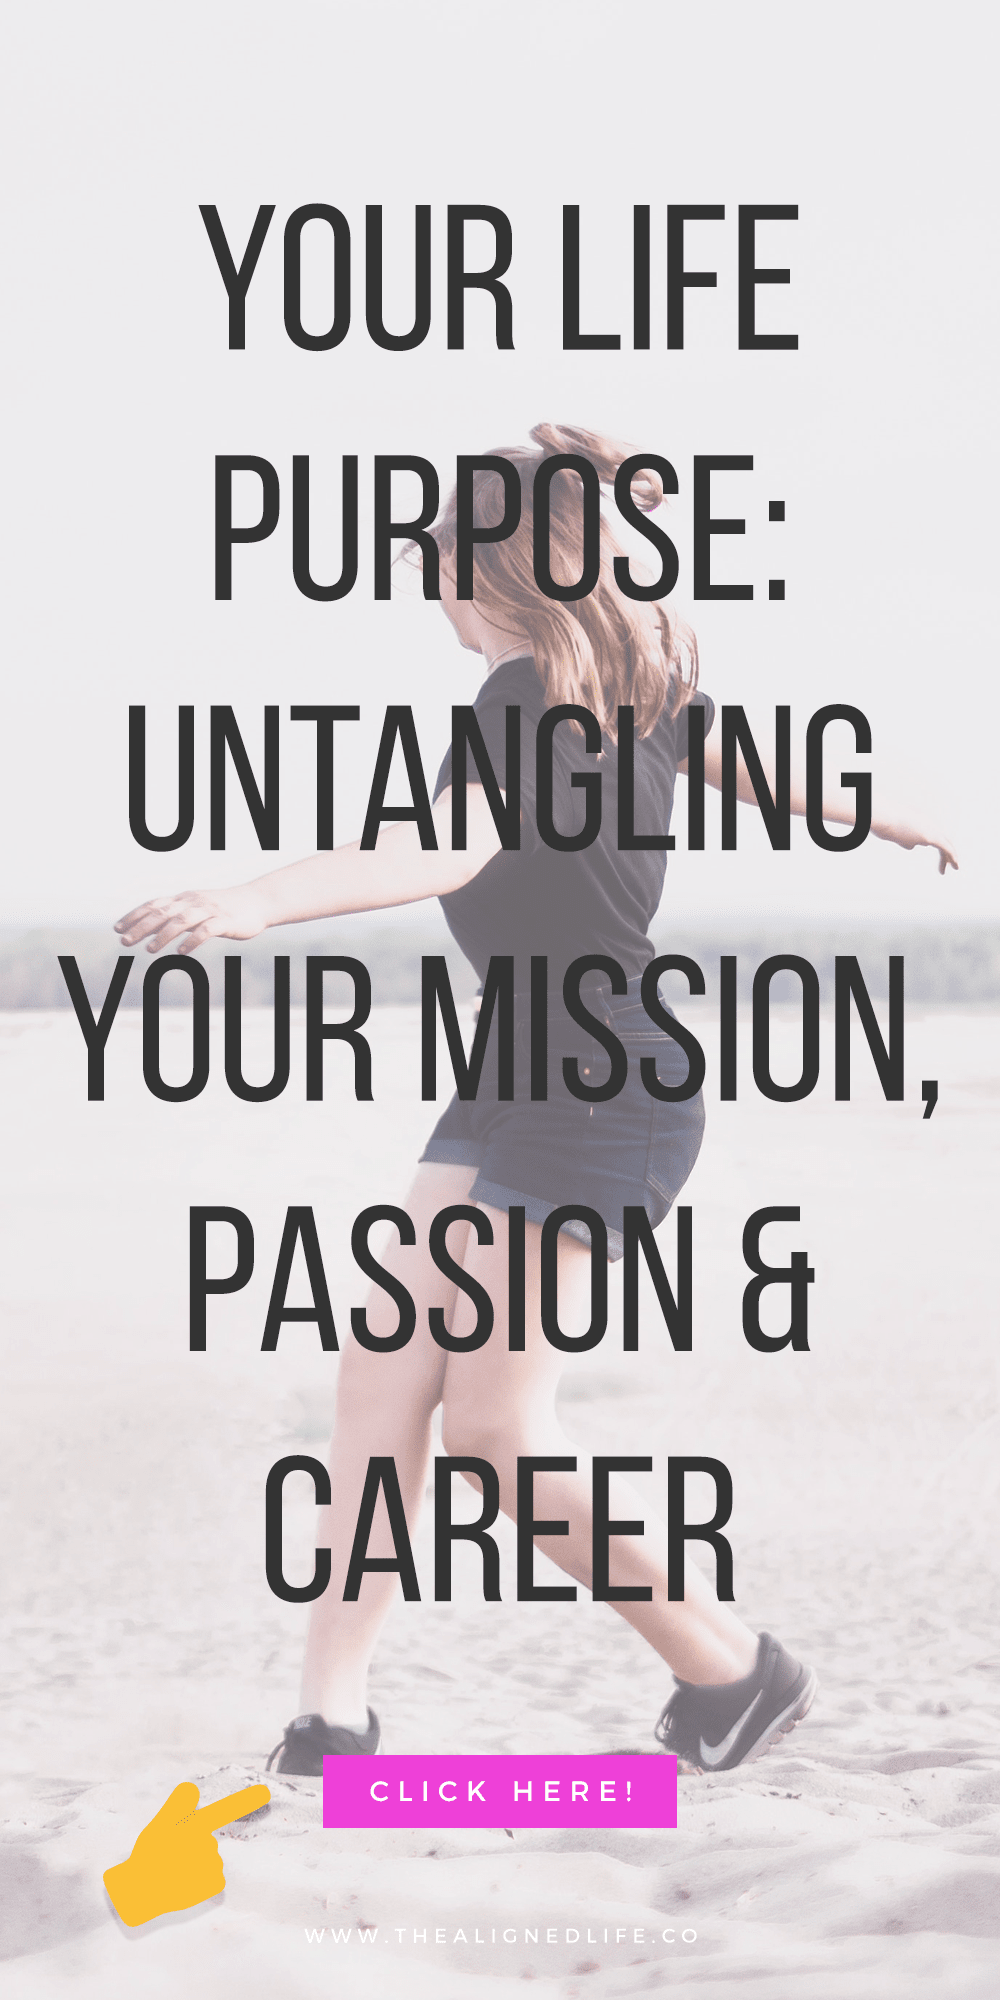 Your Life Purpose: Untangling Your Mission, Passion + Career